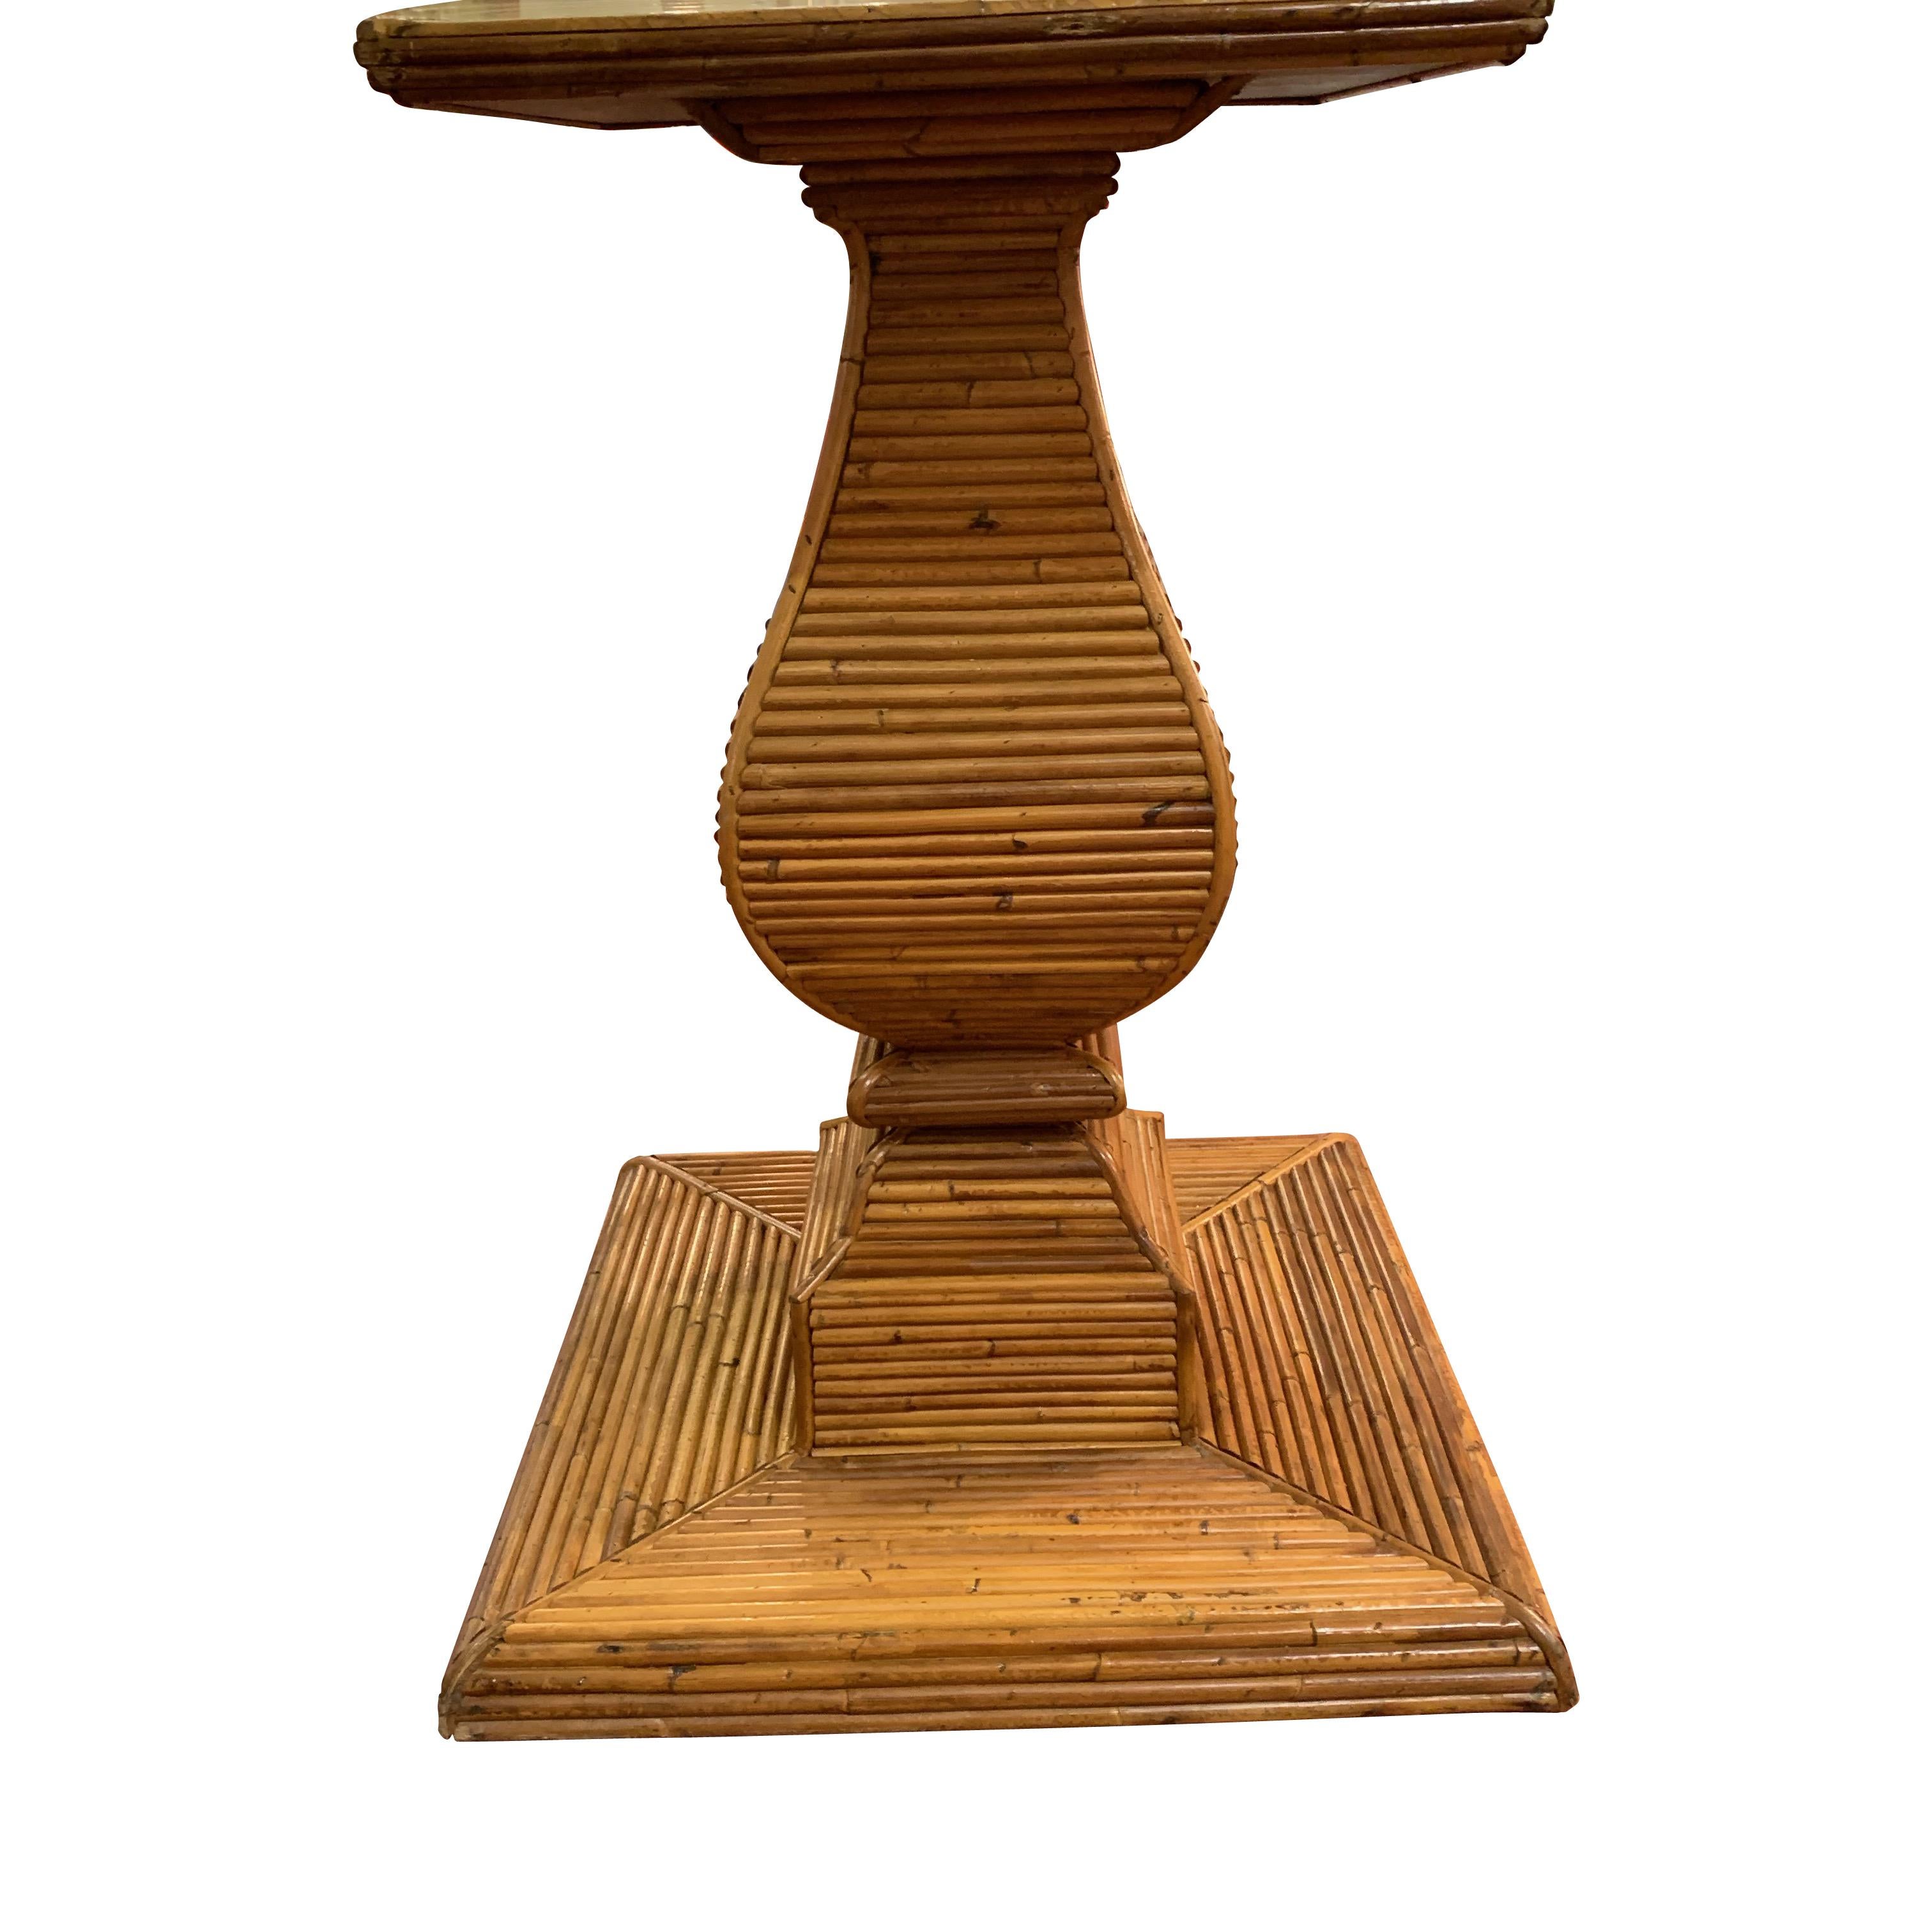 1970s Italian bamboo finial shaped base round glass top dining table
Vivai del Sud Rome design.
   